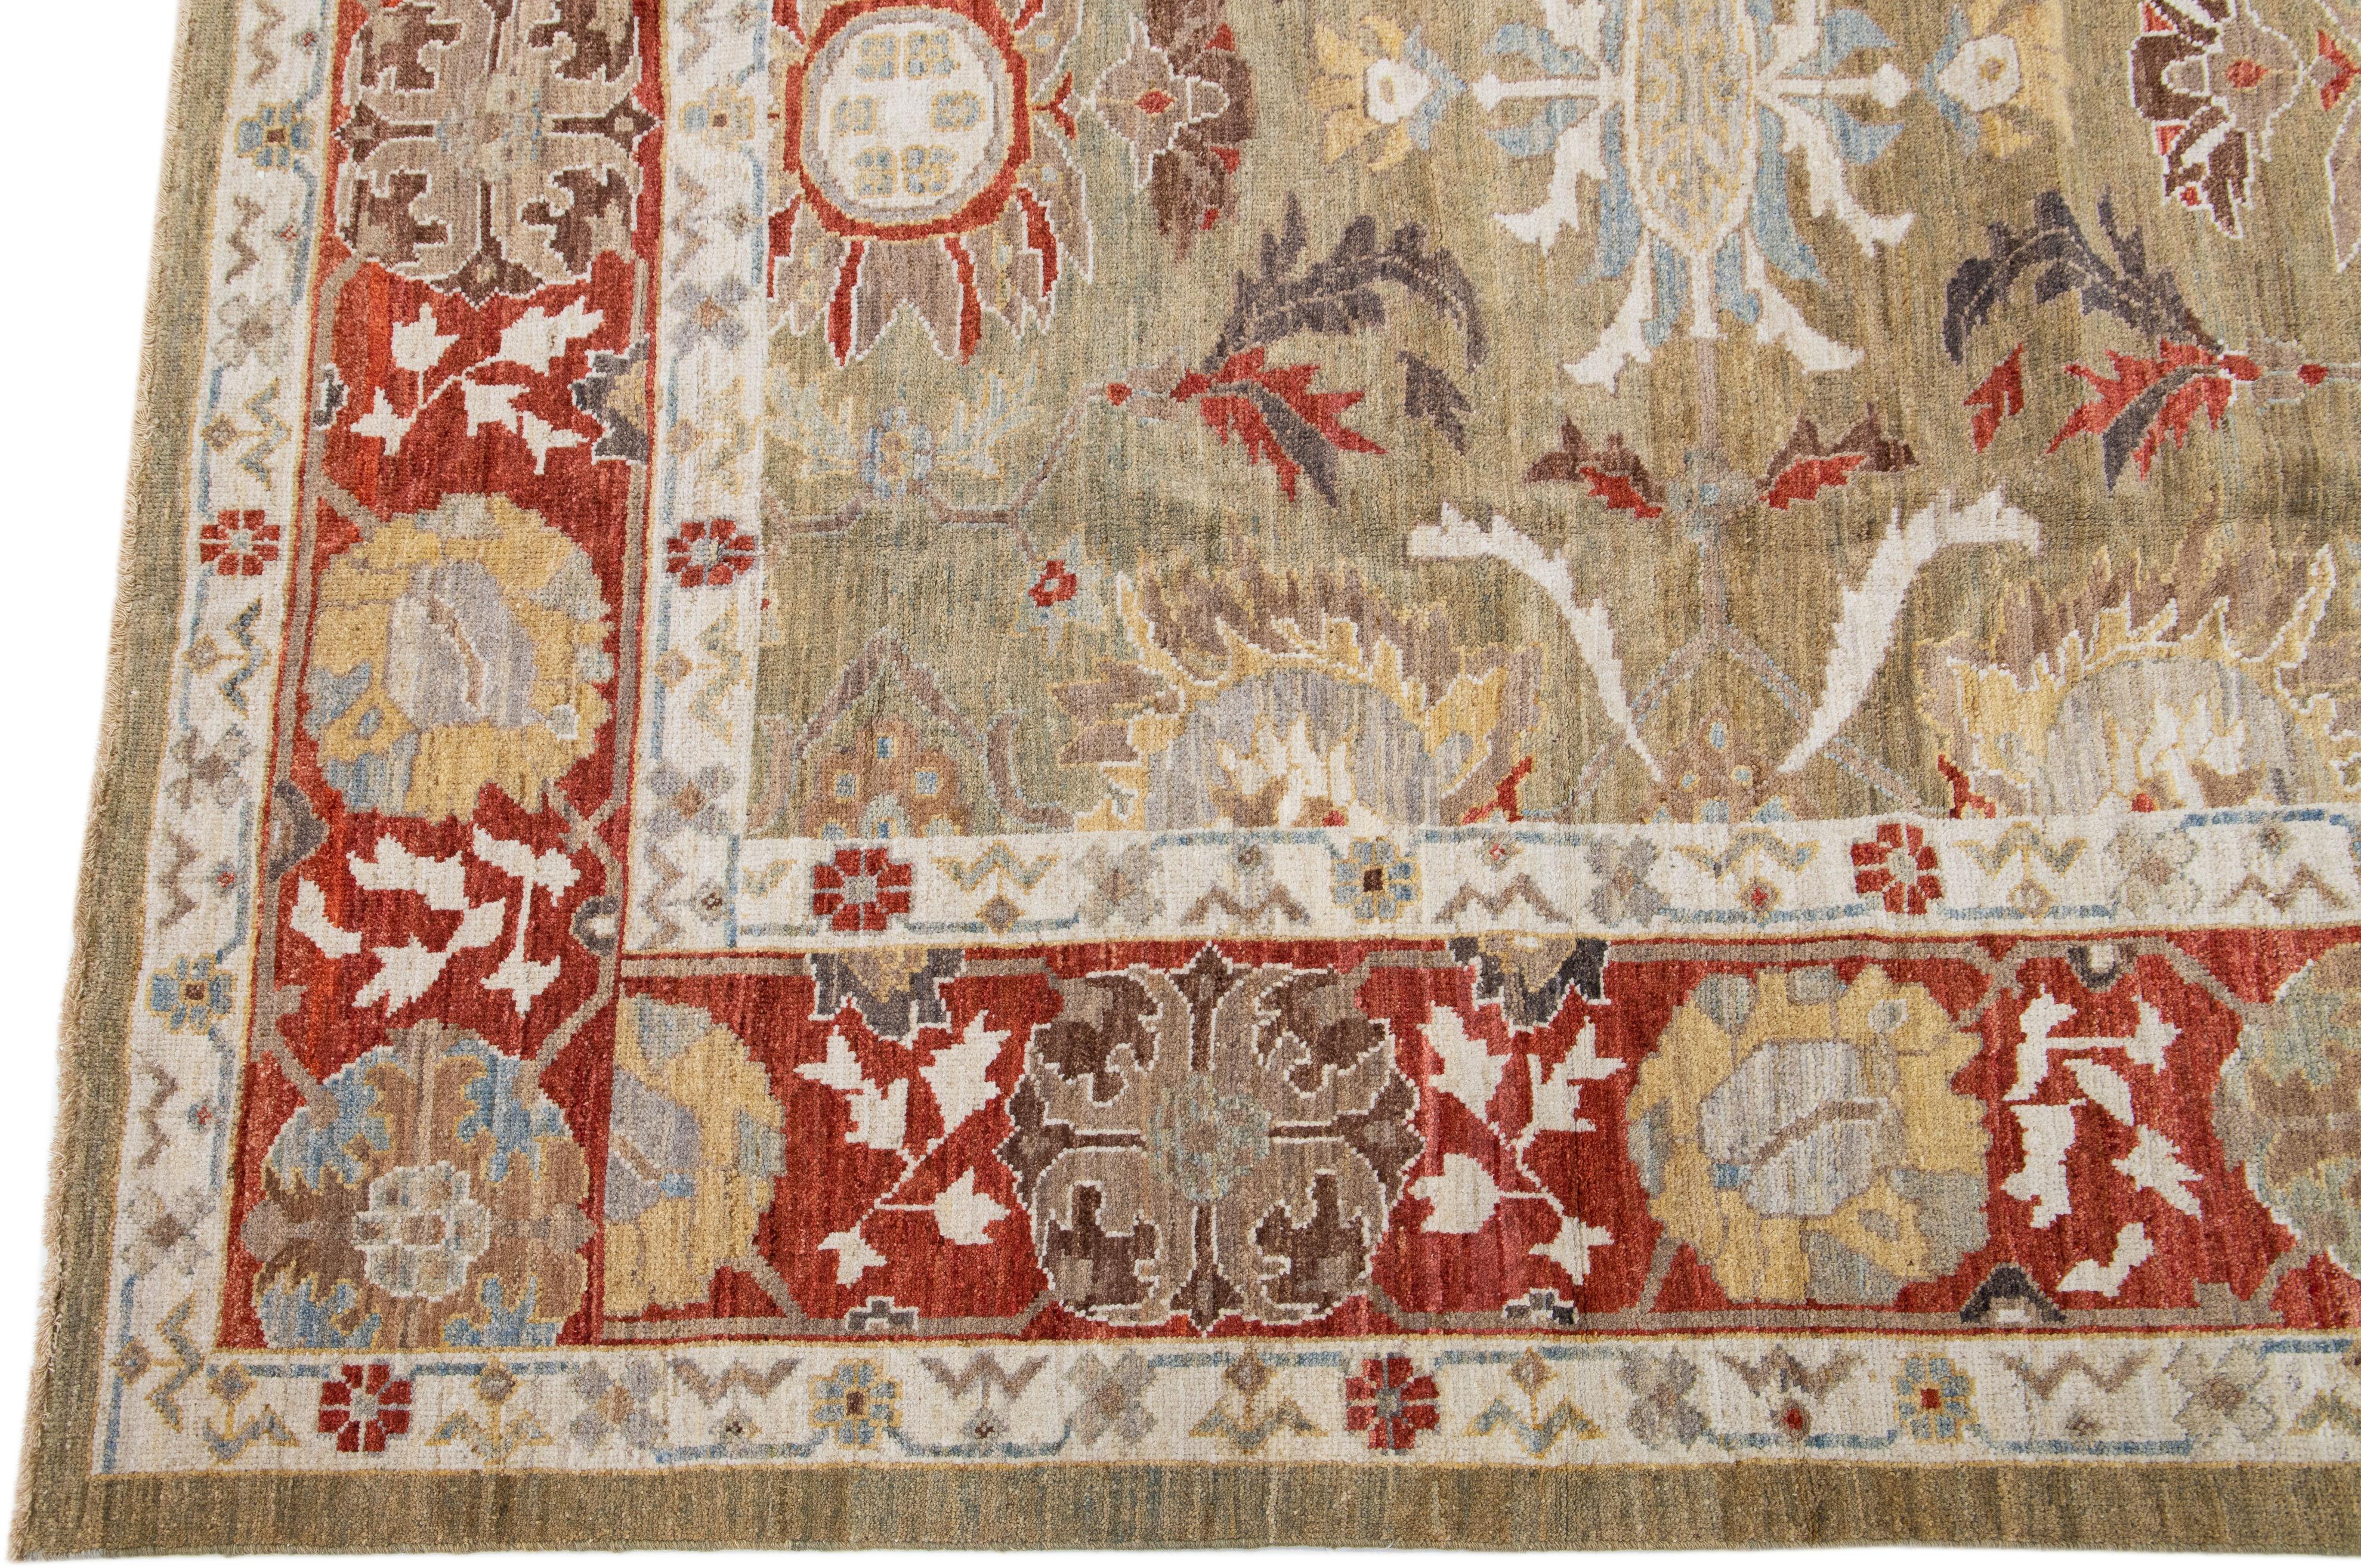 Beautiful modern Sultanabad hand-knotted wool rug with a brown color field. This rug has a designed-red frame with tan, gray, and blue accents in a gorgeous all-over floral design.

This rug measures: 8' x 10'3